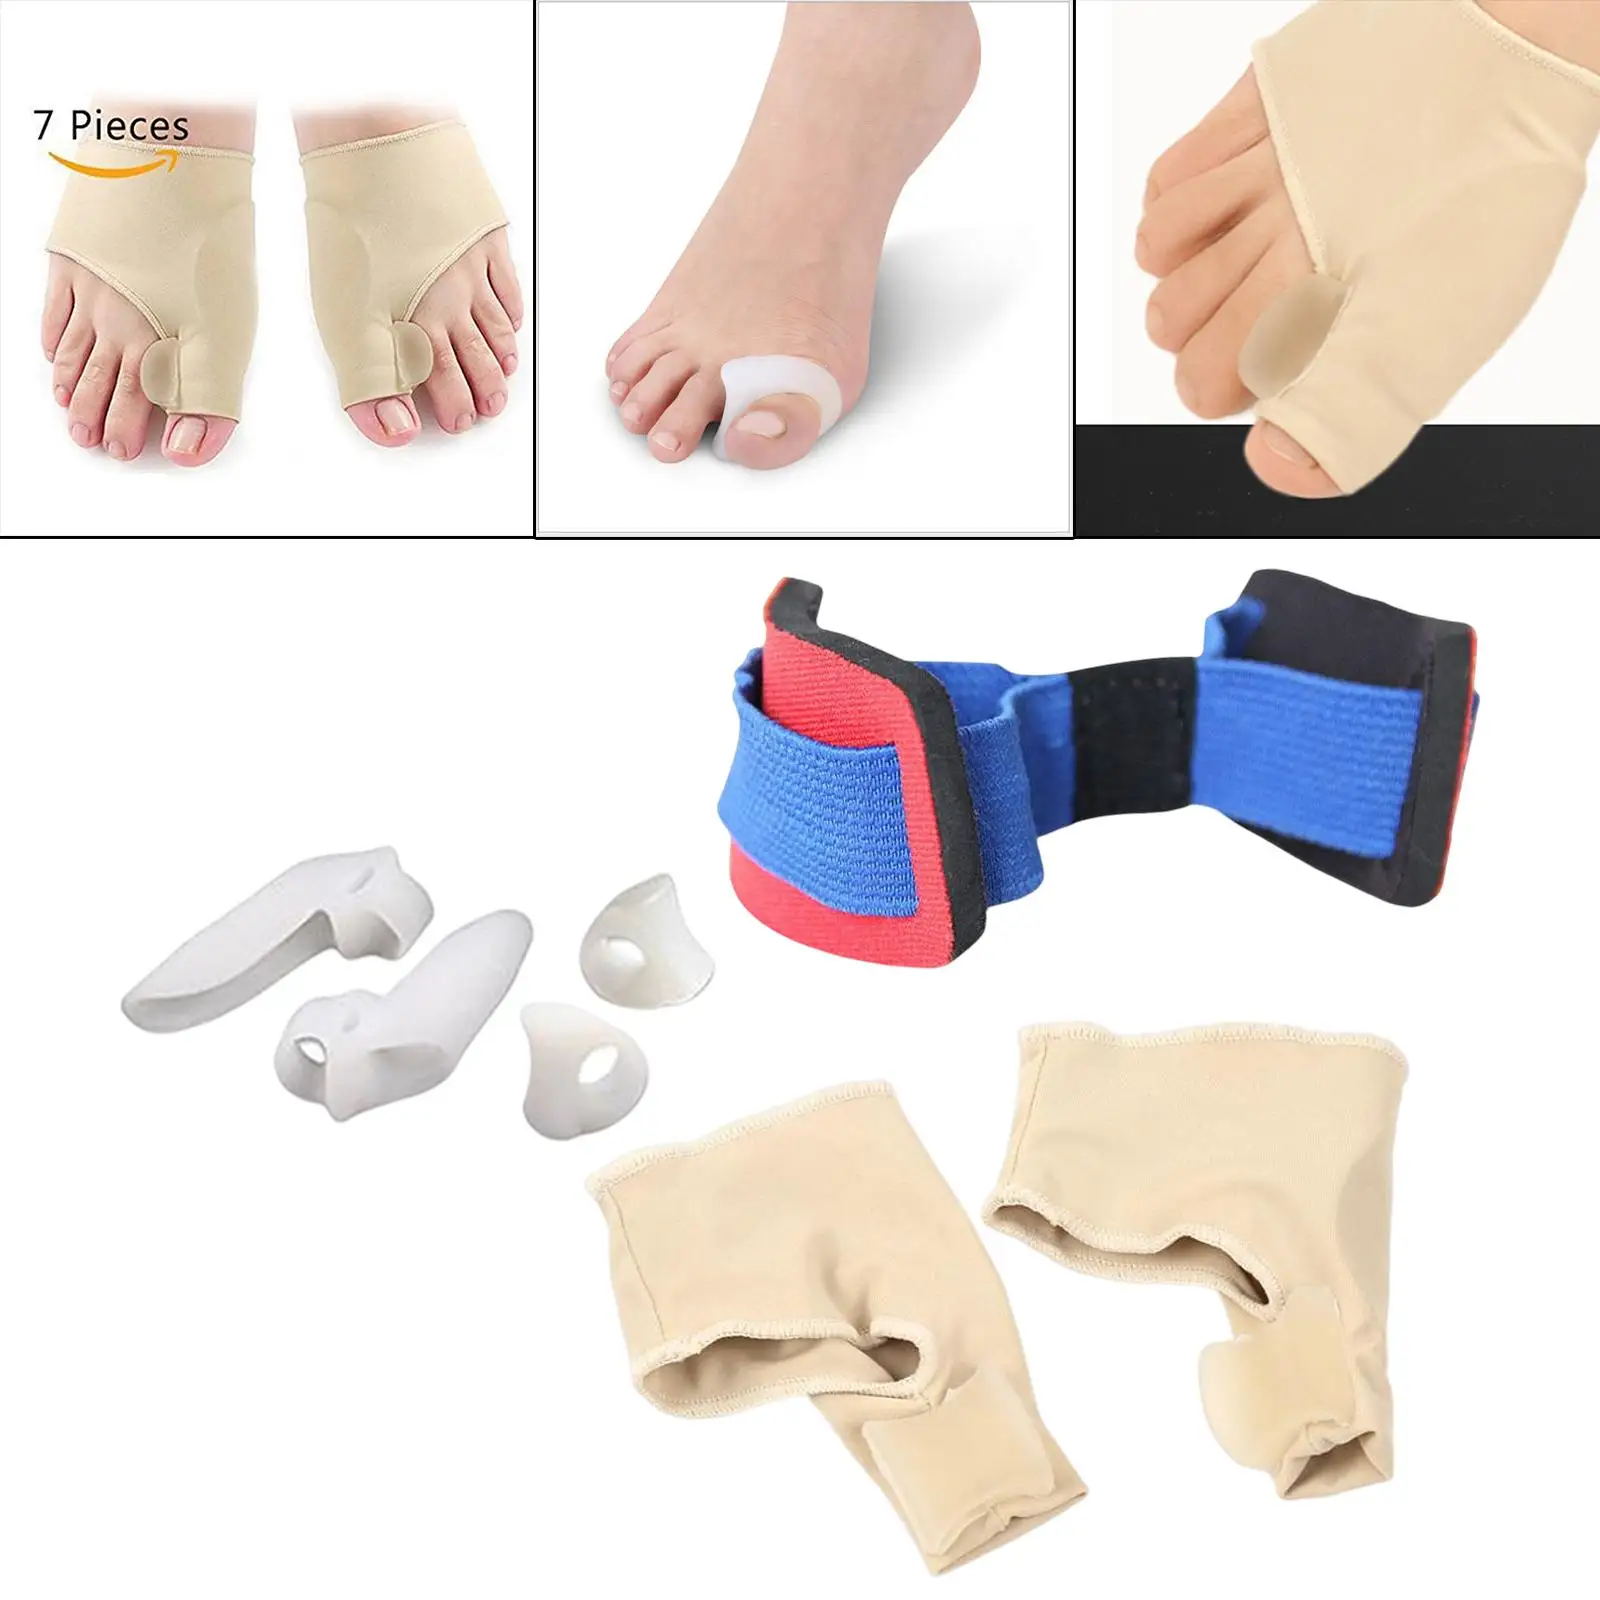 Bunion Corrector Set Men Women Protective Hallux Valgus Correction Day Night Support Protector Sleeves Bunion Pads Sleeves Brace